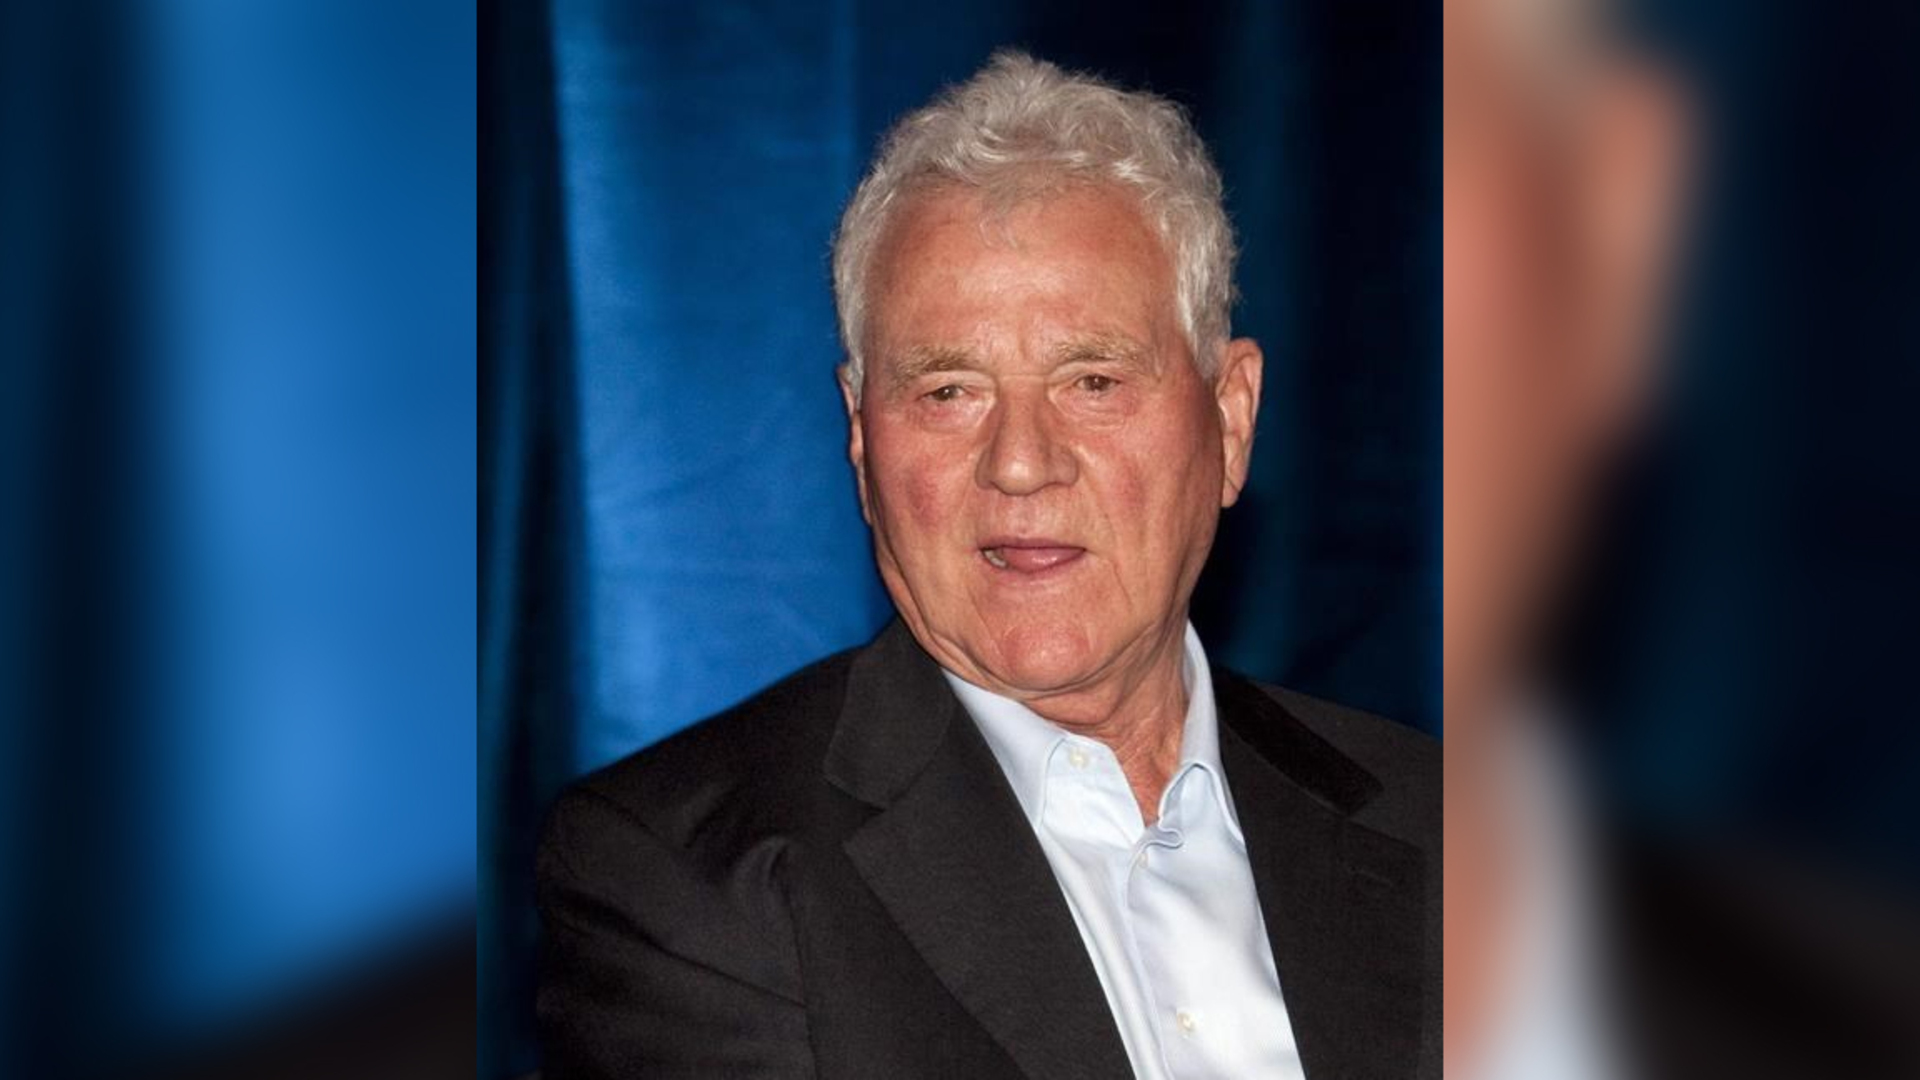 Canadian businessman Frank Stronach charged in sex assault probe